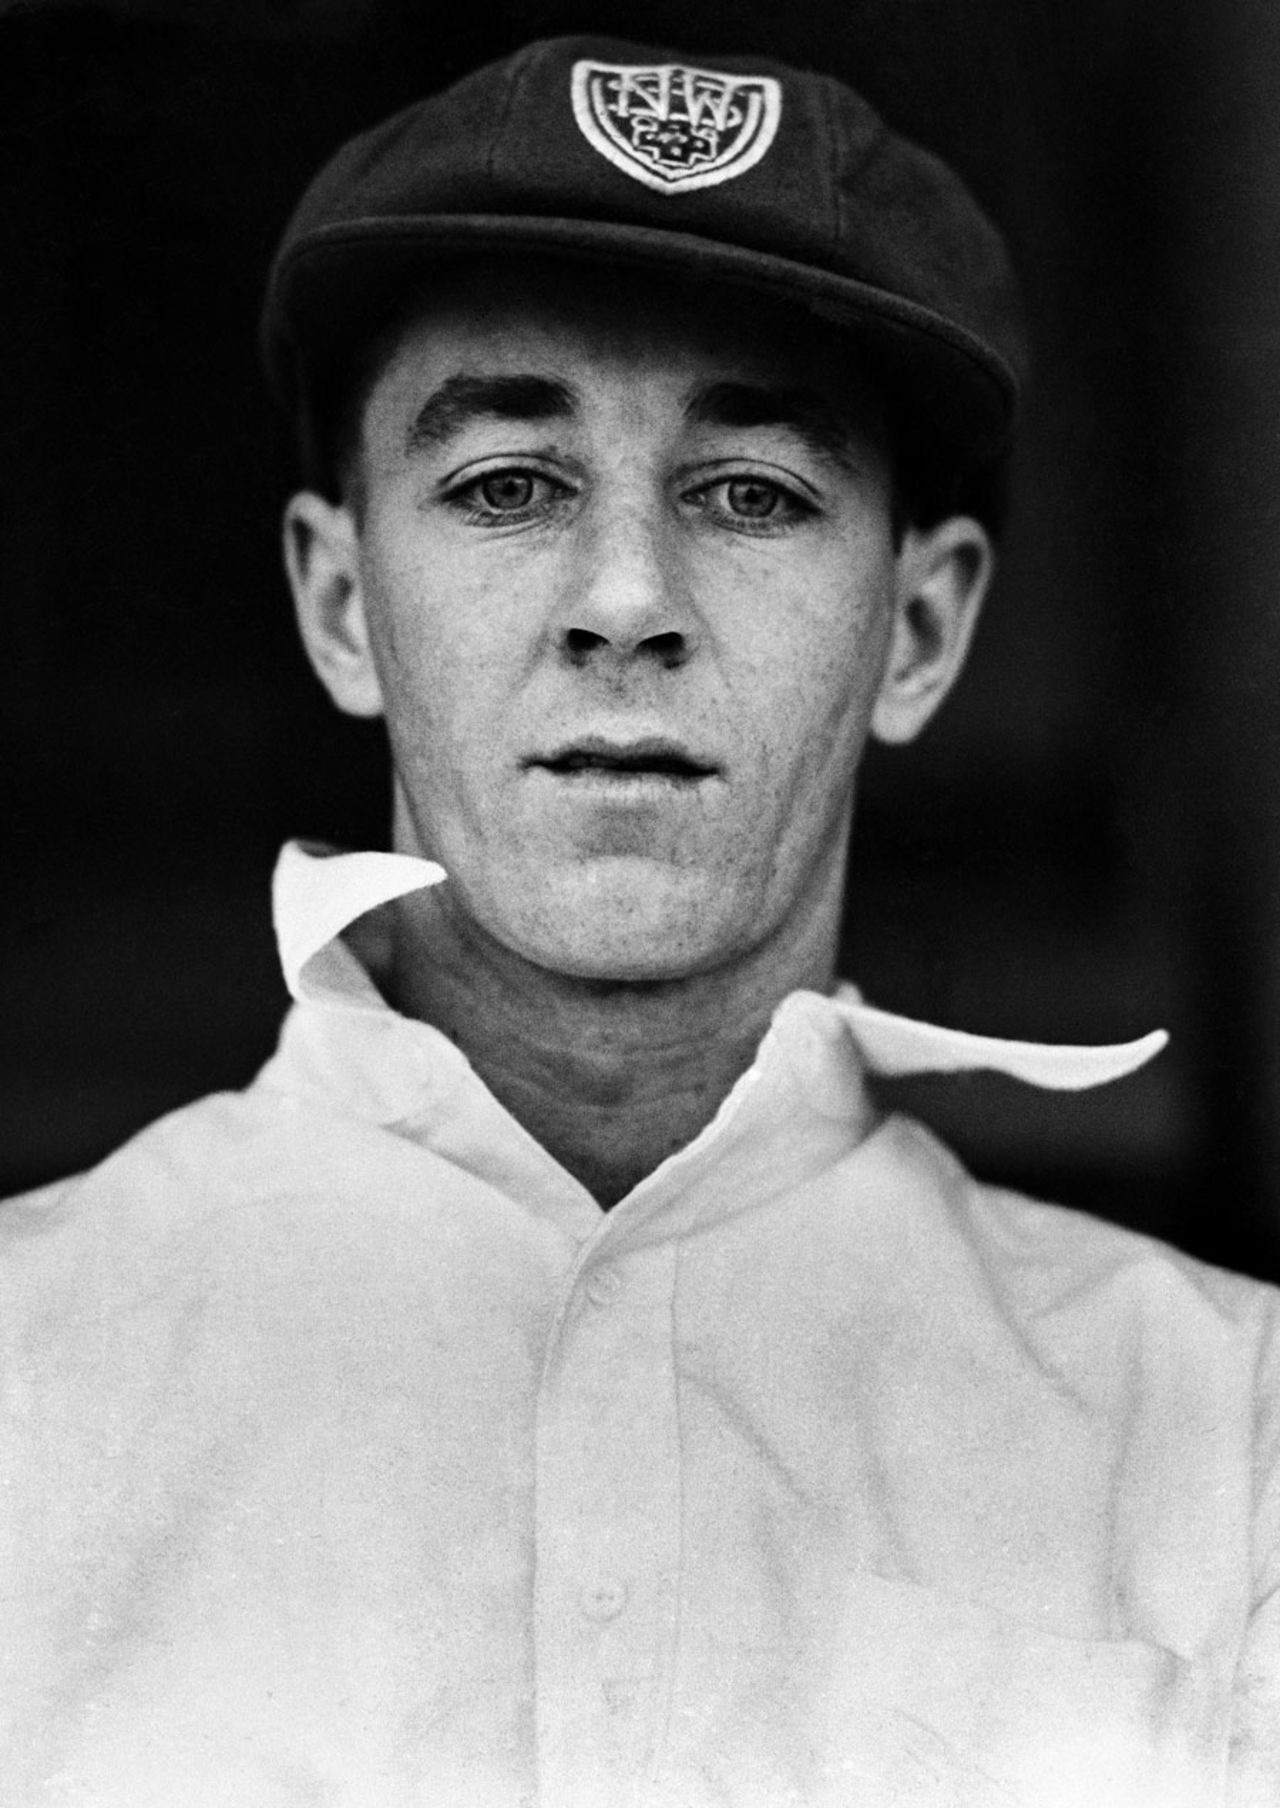 New South Wales batsman Ray Robinson played one Test for Australia, October 27, 1936